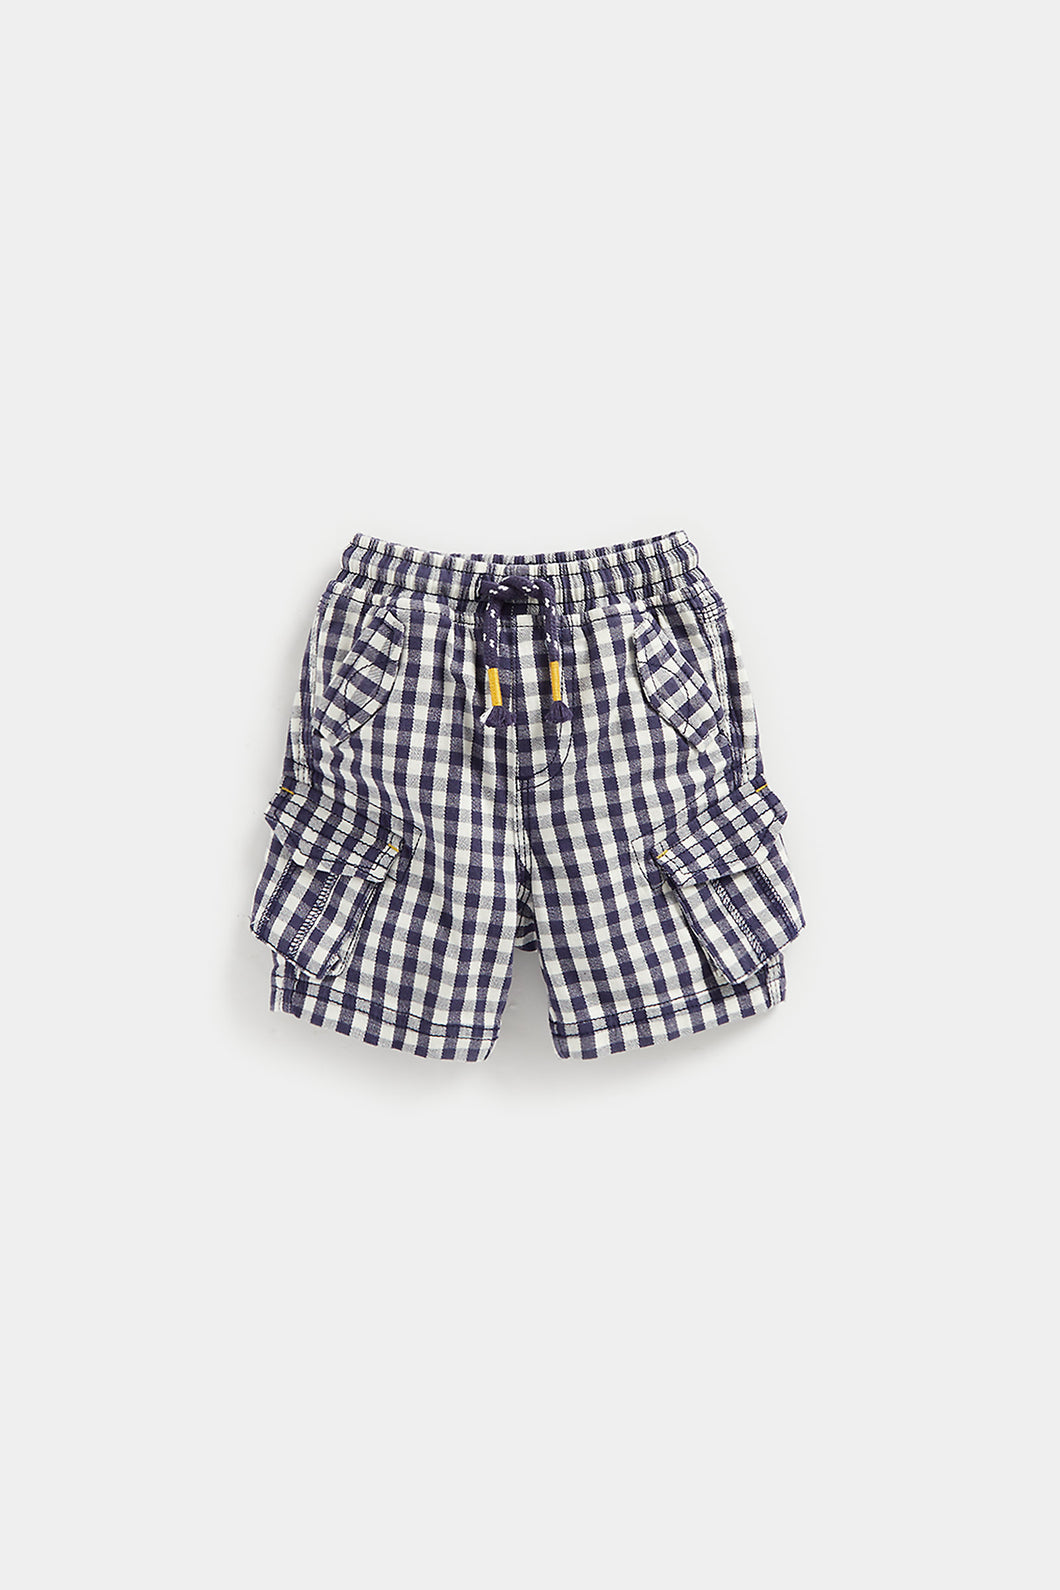 Mothercare Navy Gingham Cargo Shorts